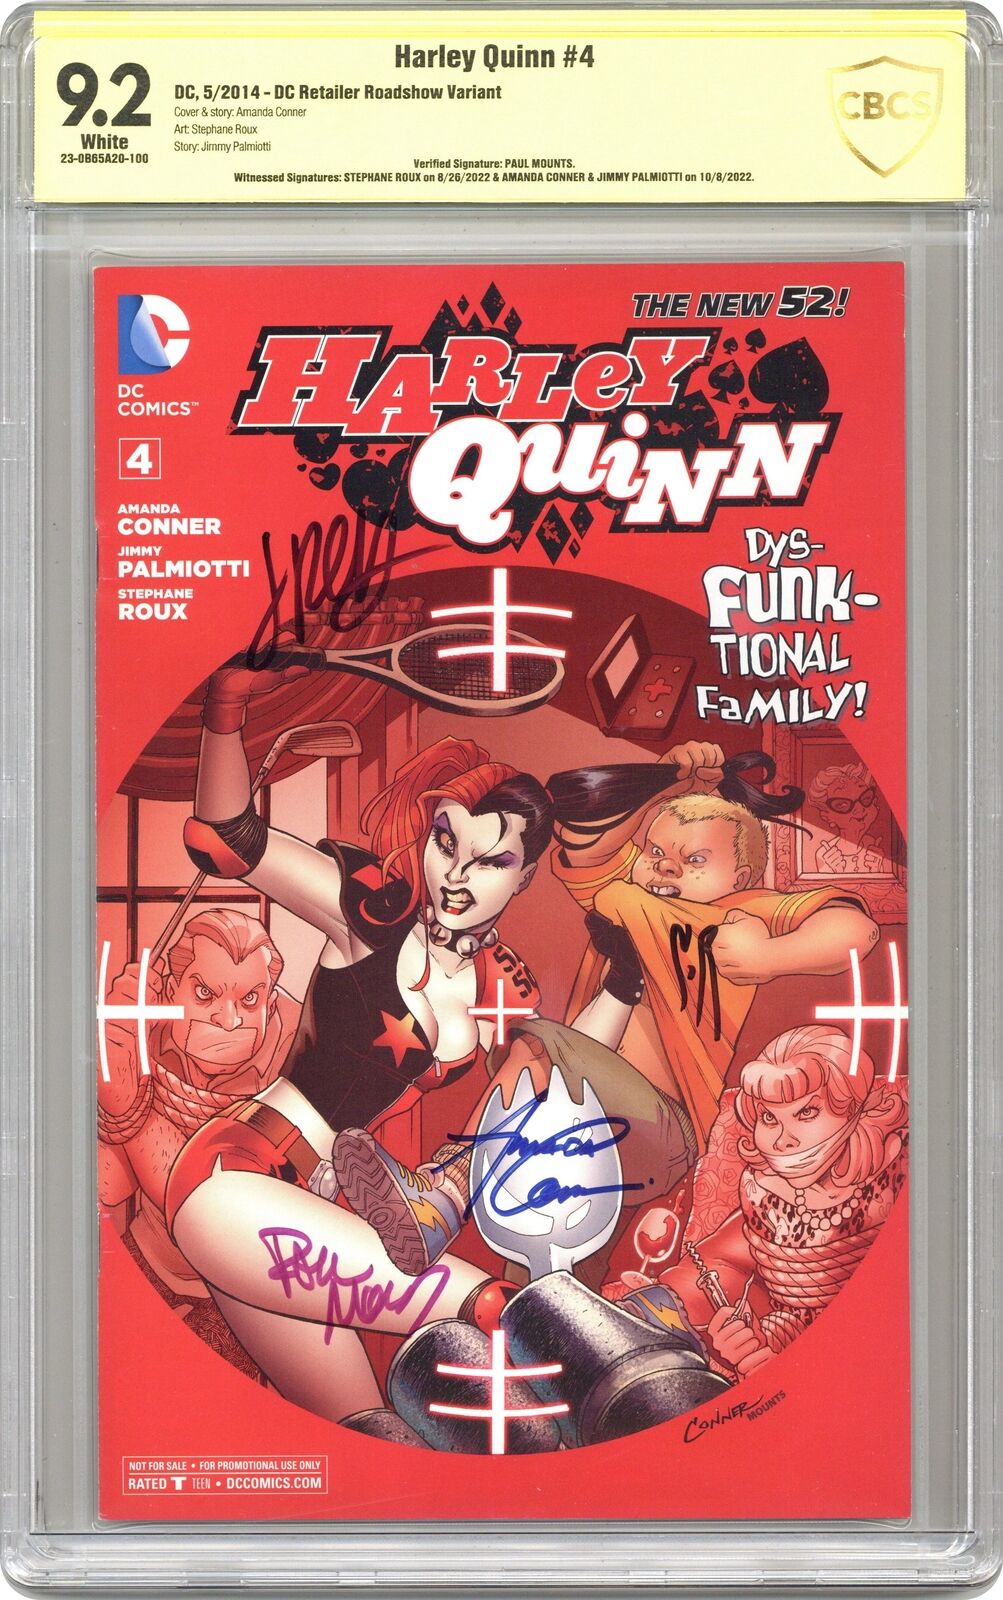 Harley Quinn #4 Conner Roadshow Variant CBCS 9.2 SS Roux/ Conner/ Palmiotti 2014